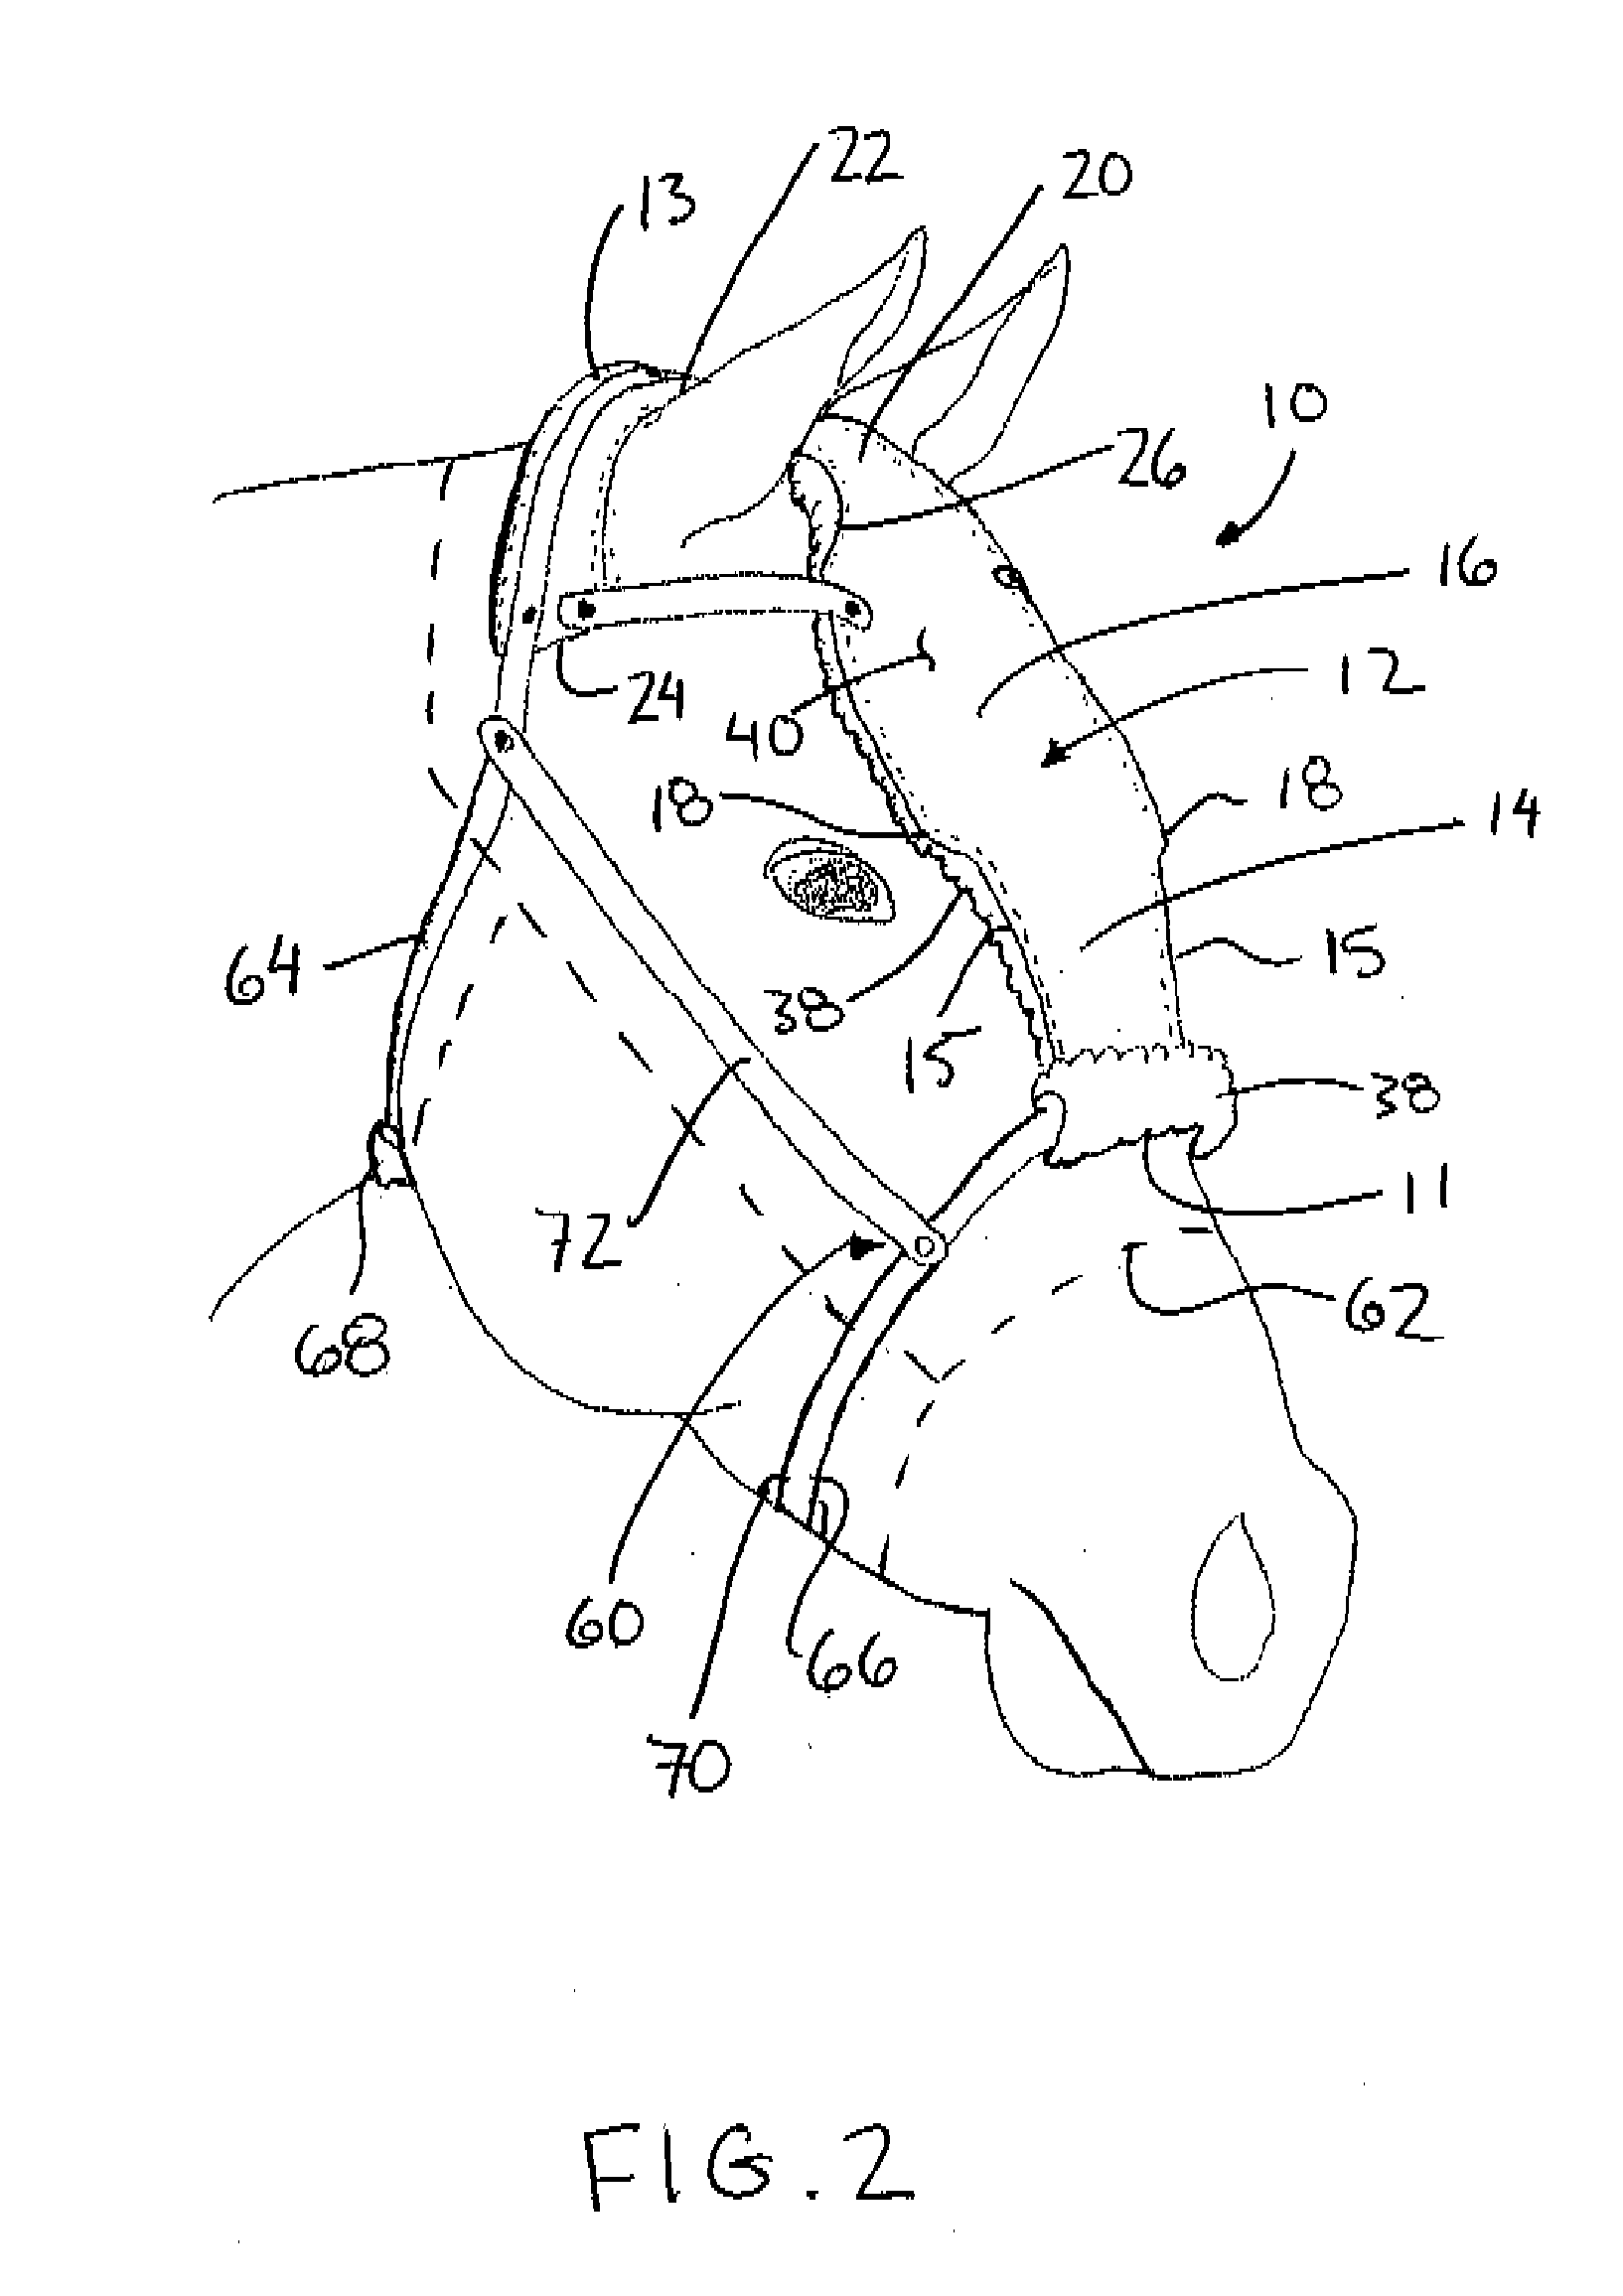 Apparatus and method for equine facial protection